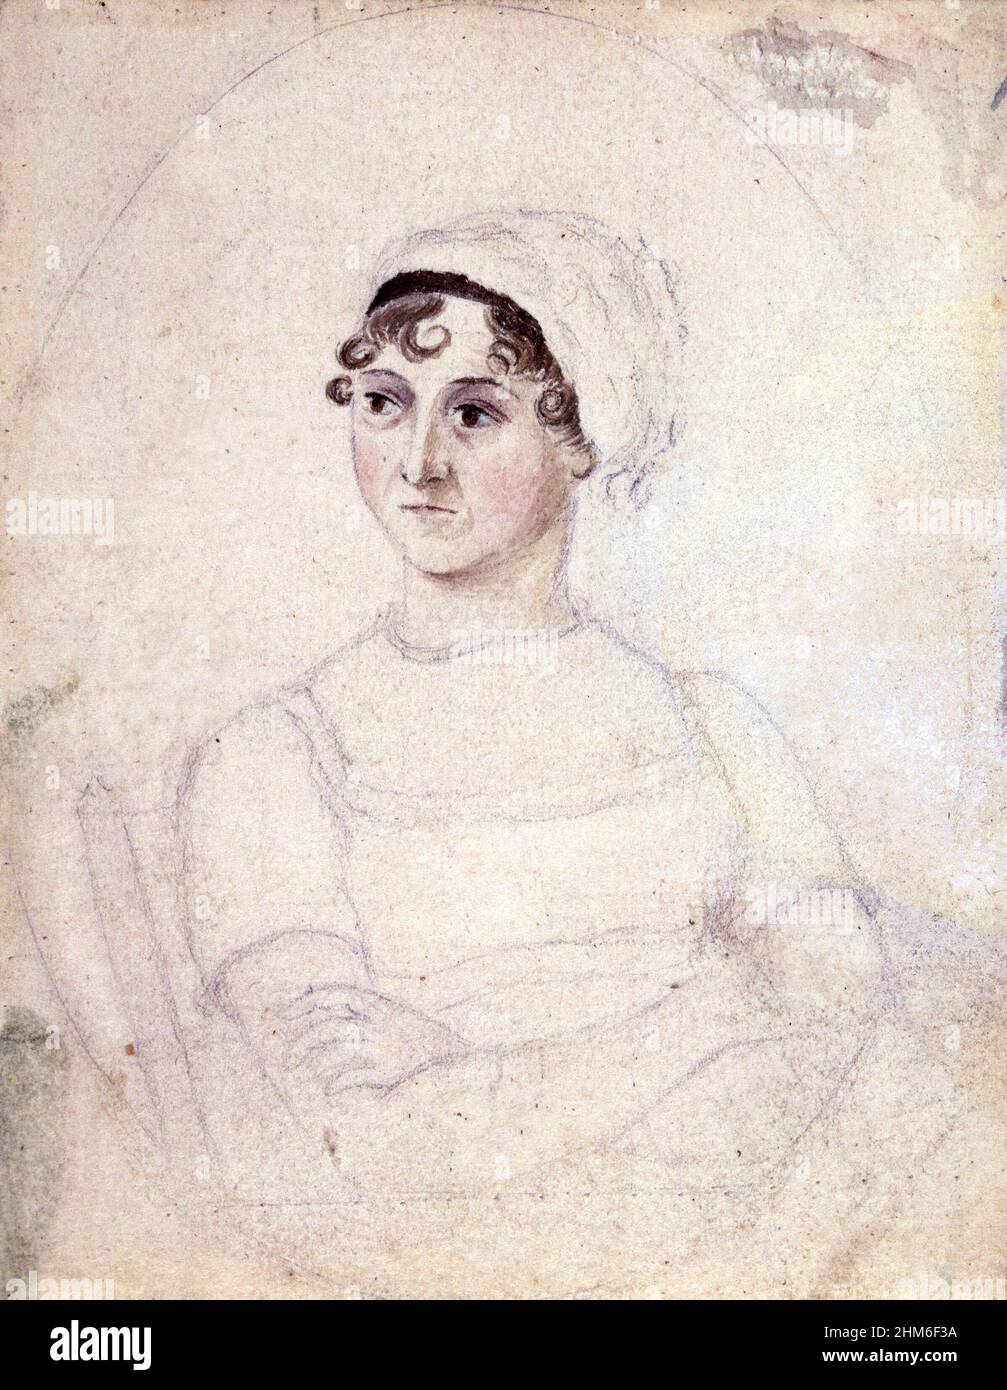 A portrait of the English writer Jane Austen, author of Pride and Prejudice. The portrait os from 1810 when she was 35 yrs old and was drawn by her sister Cassandra. Stock Photo